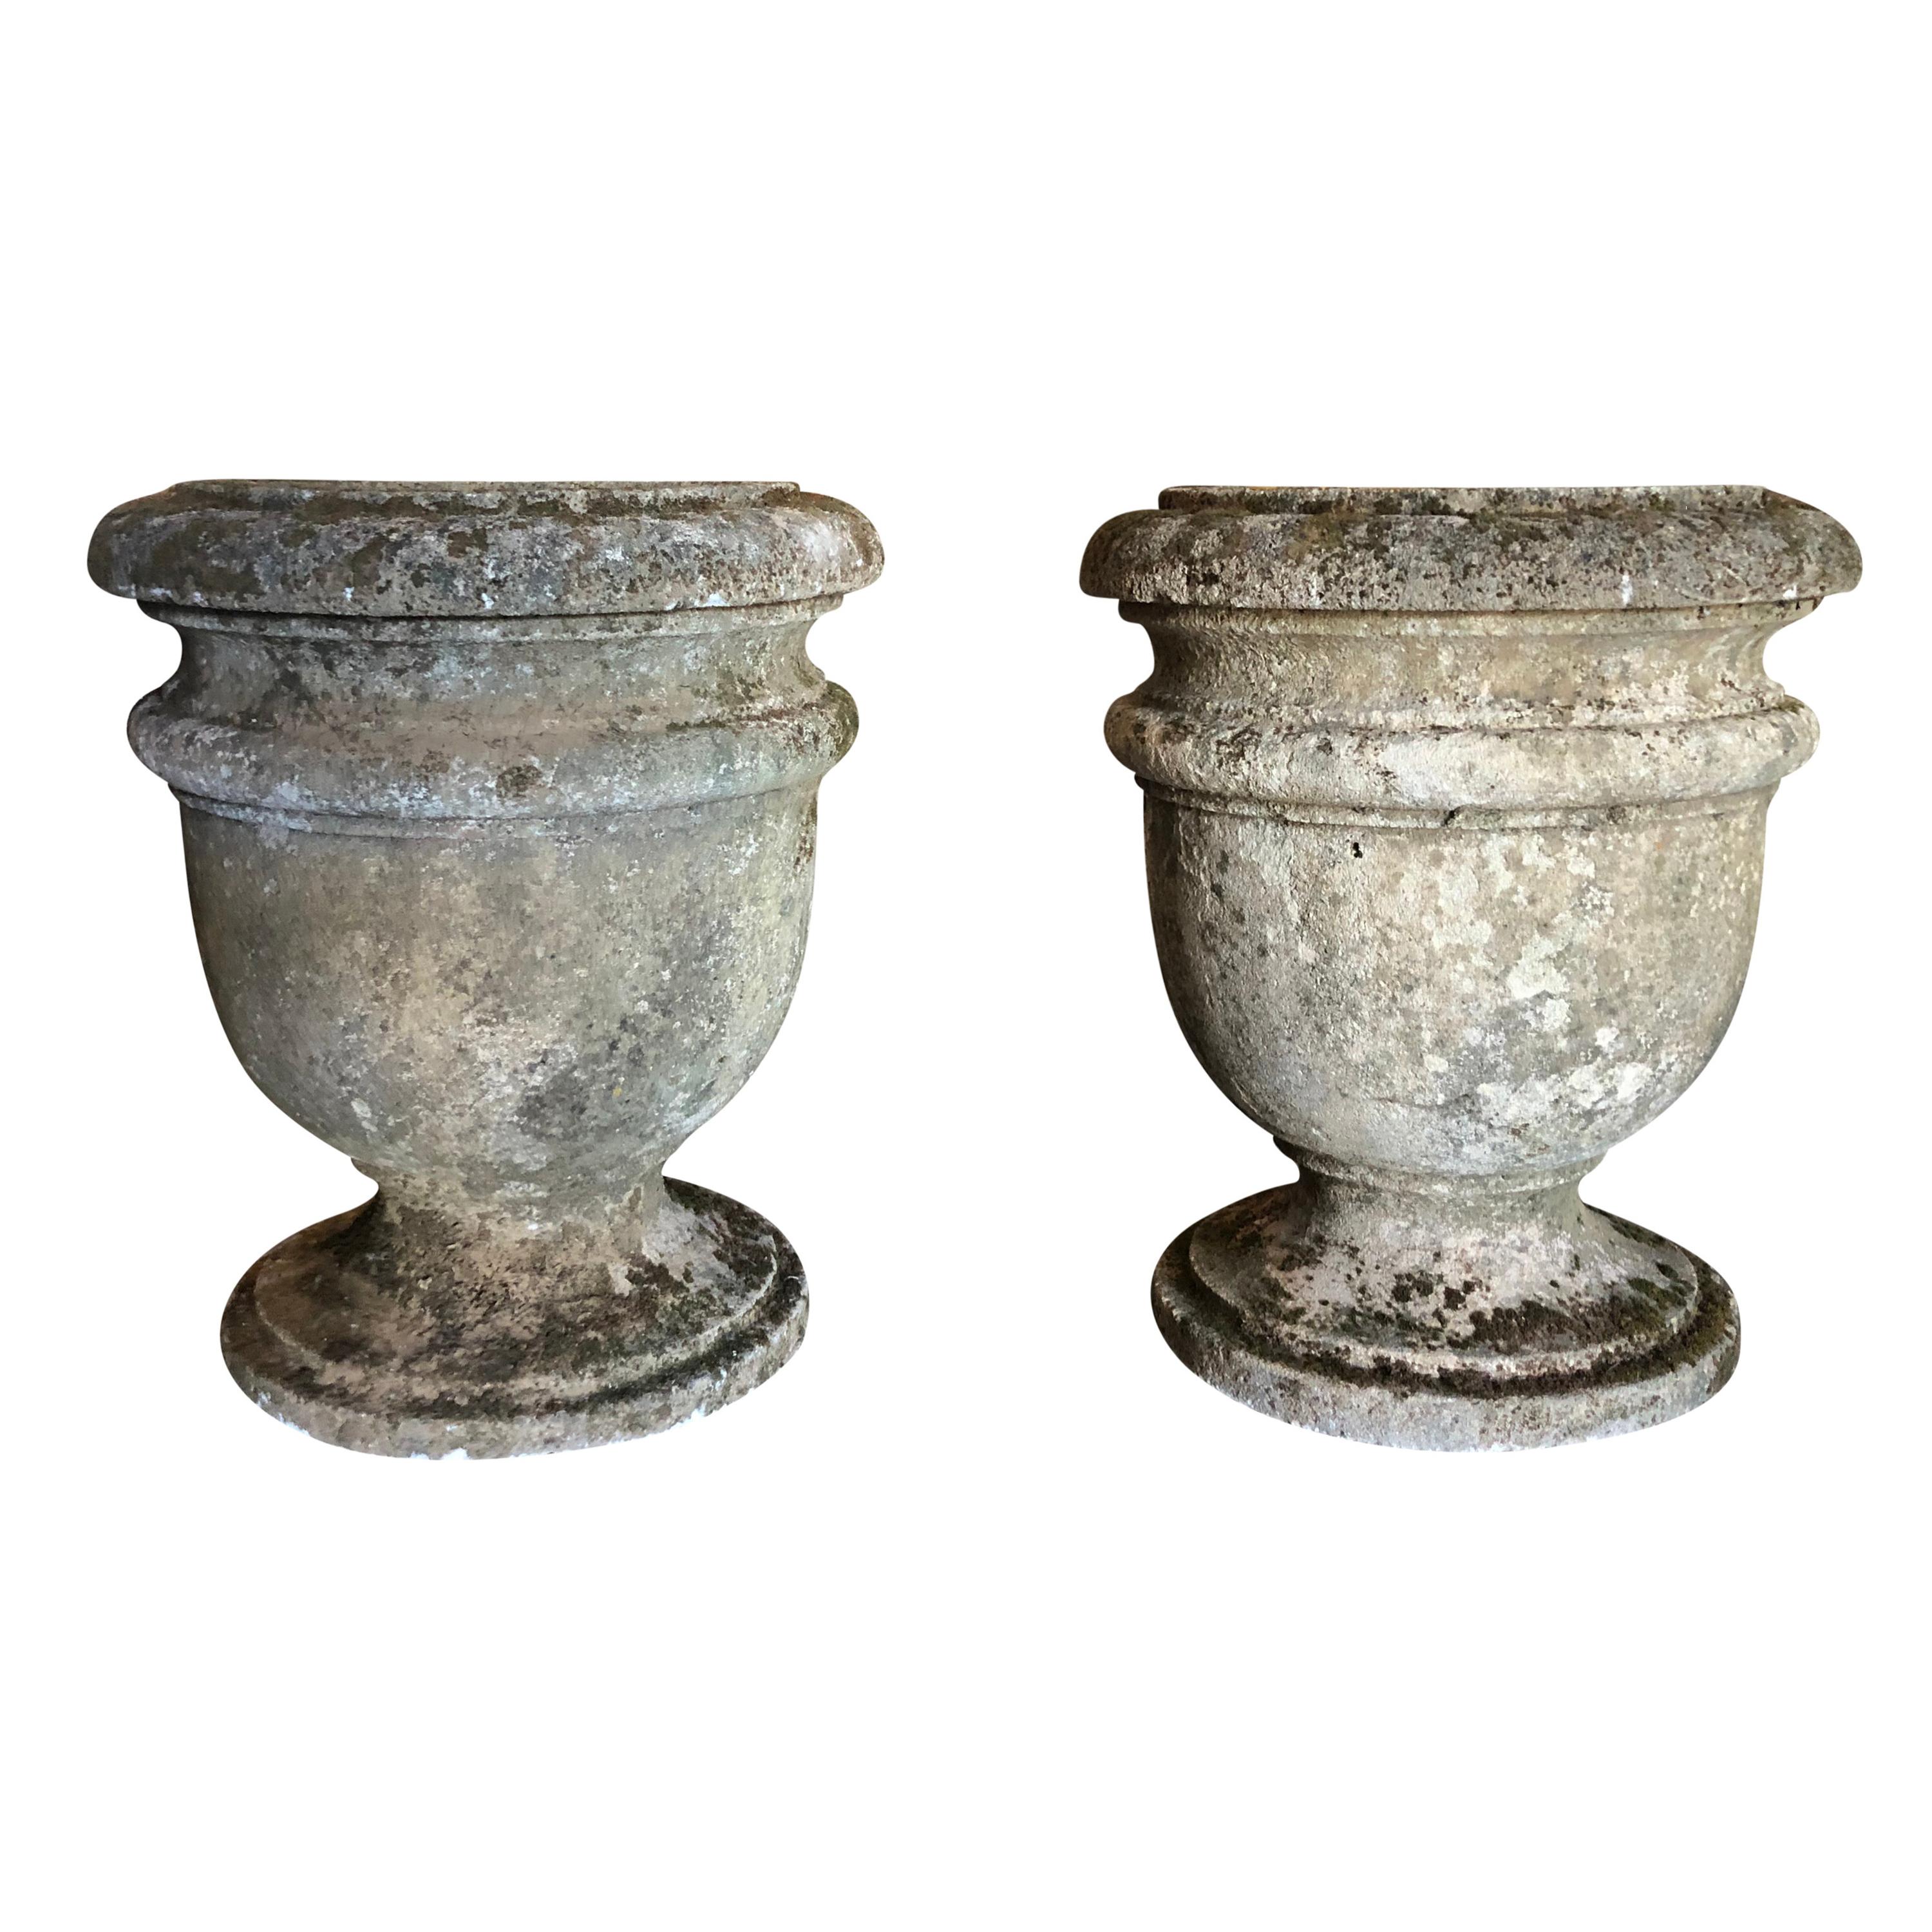 19th Century Pair of French Planter Urns